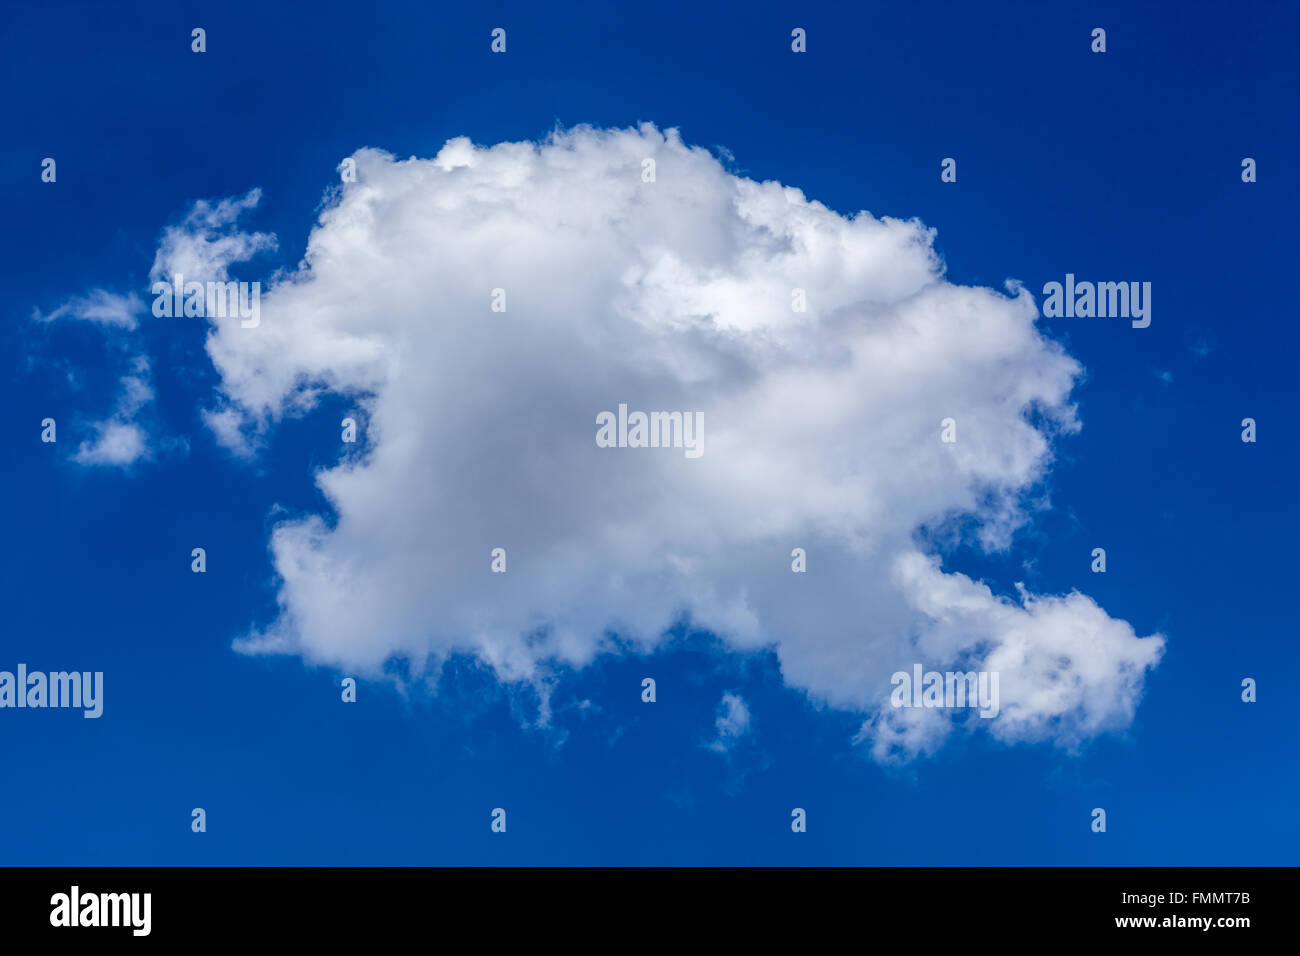 Isolated white fluffy clouds in blue sky Stock Photo